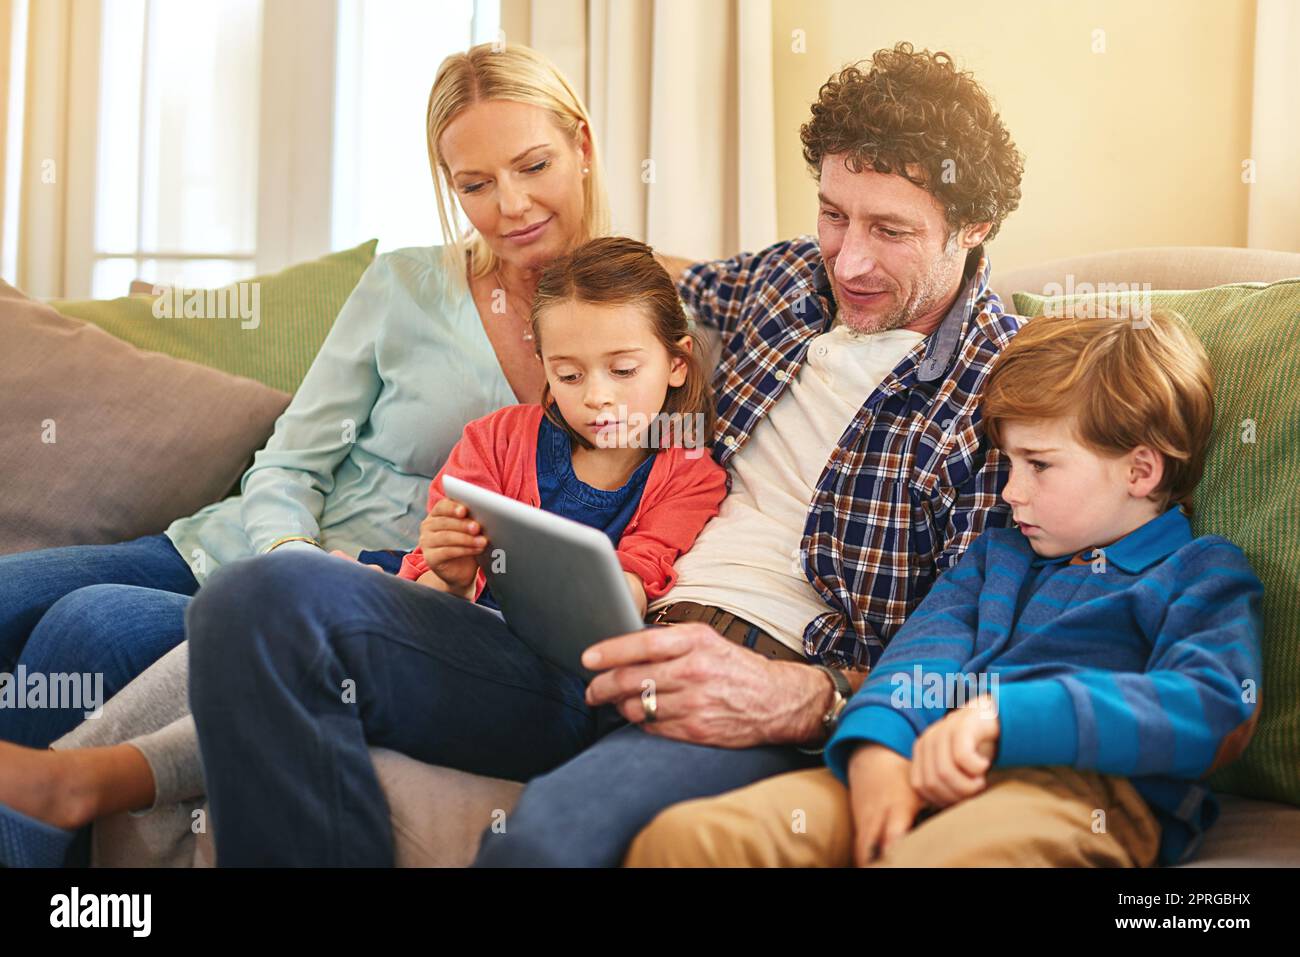 Theyre a tech savvy family. a family browsing together on a digital tablet at home. Stock Photo